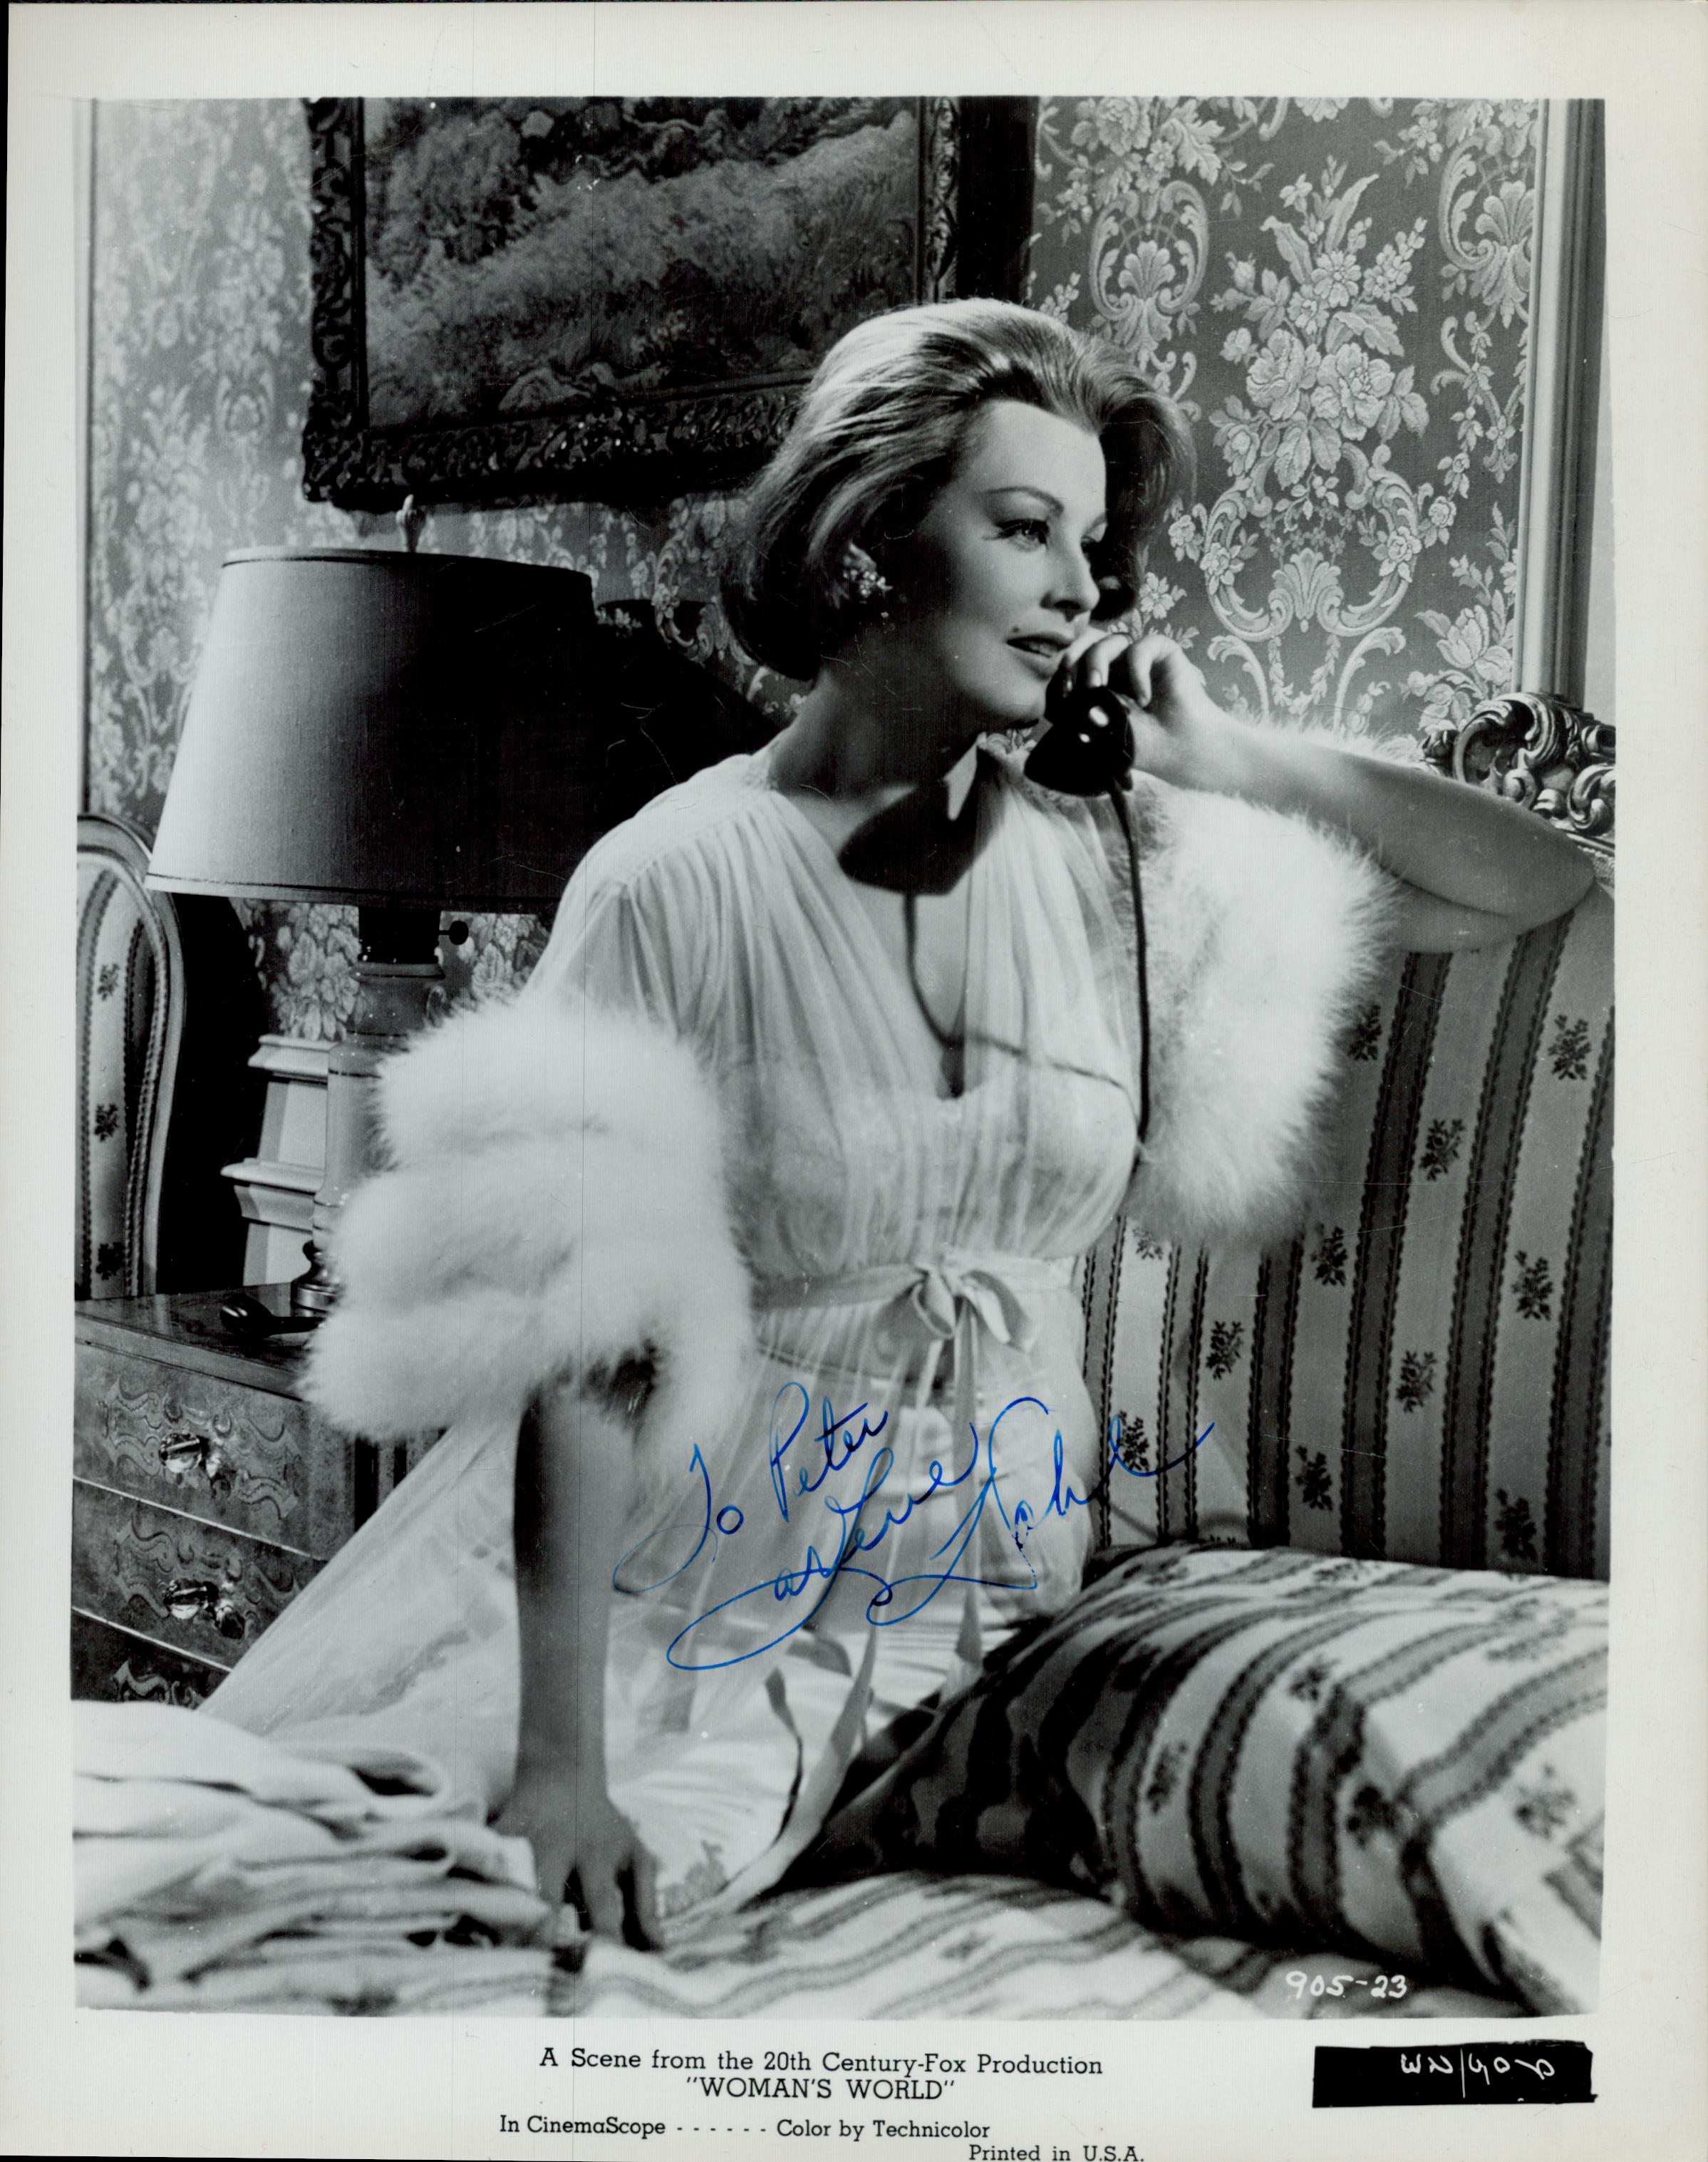 Arlene Dahl (1925-2021), actress. A vintage signed and dedicated 10x8 inch photo, seated on a bed in